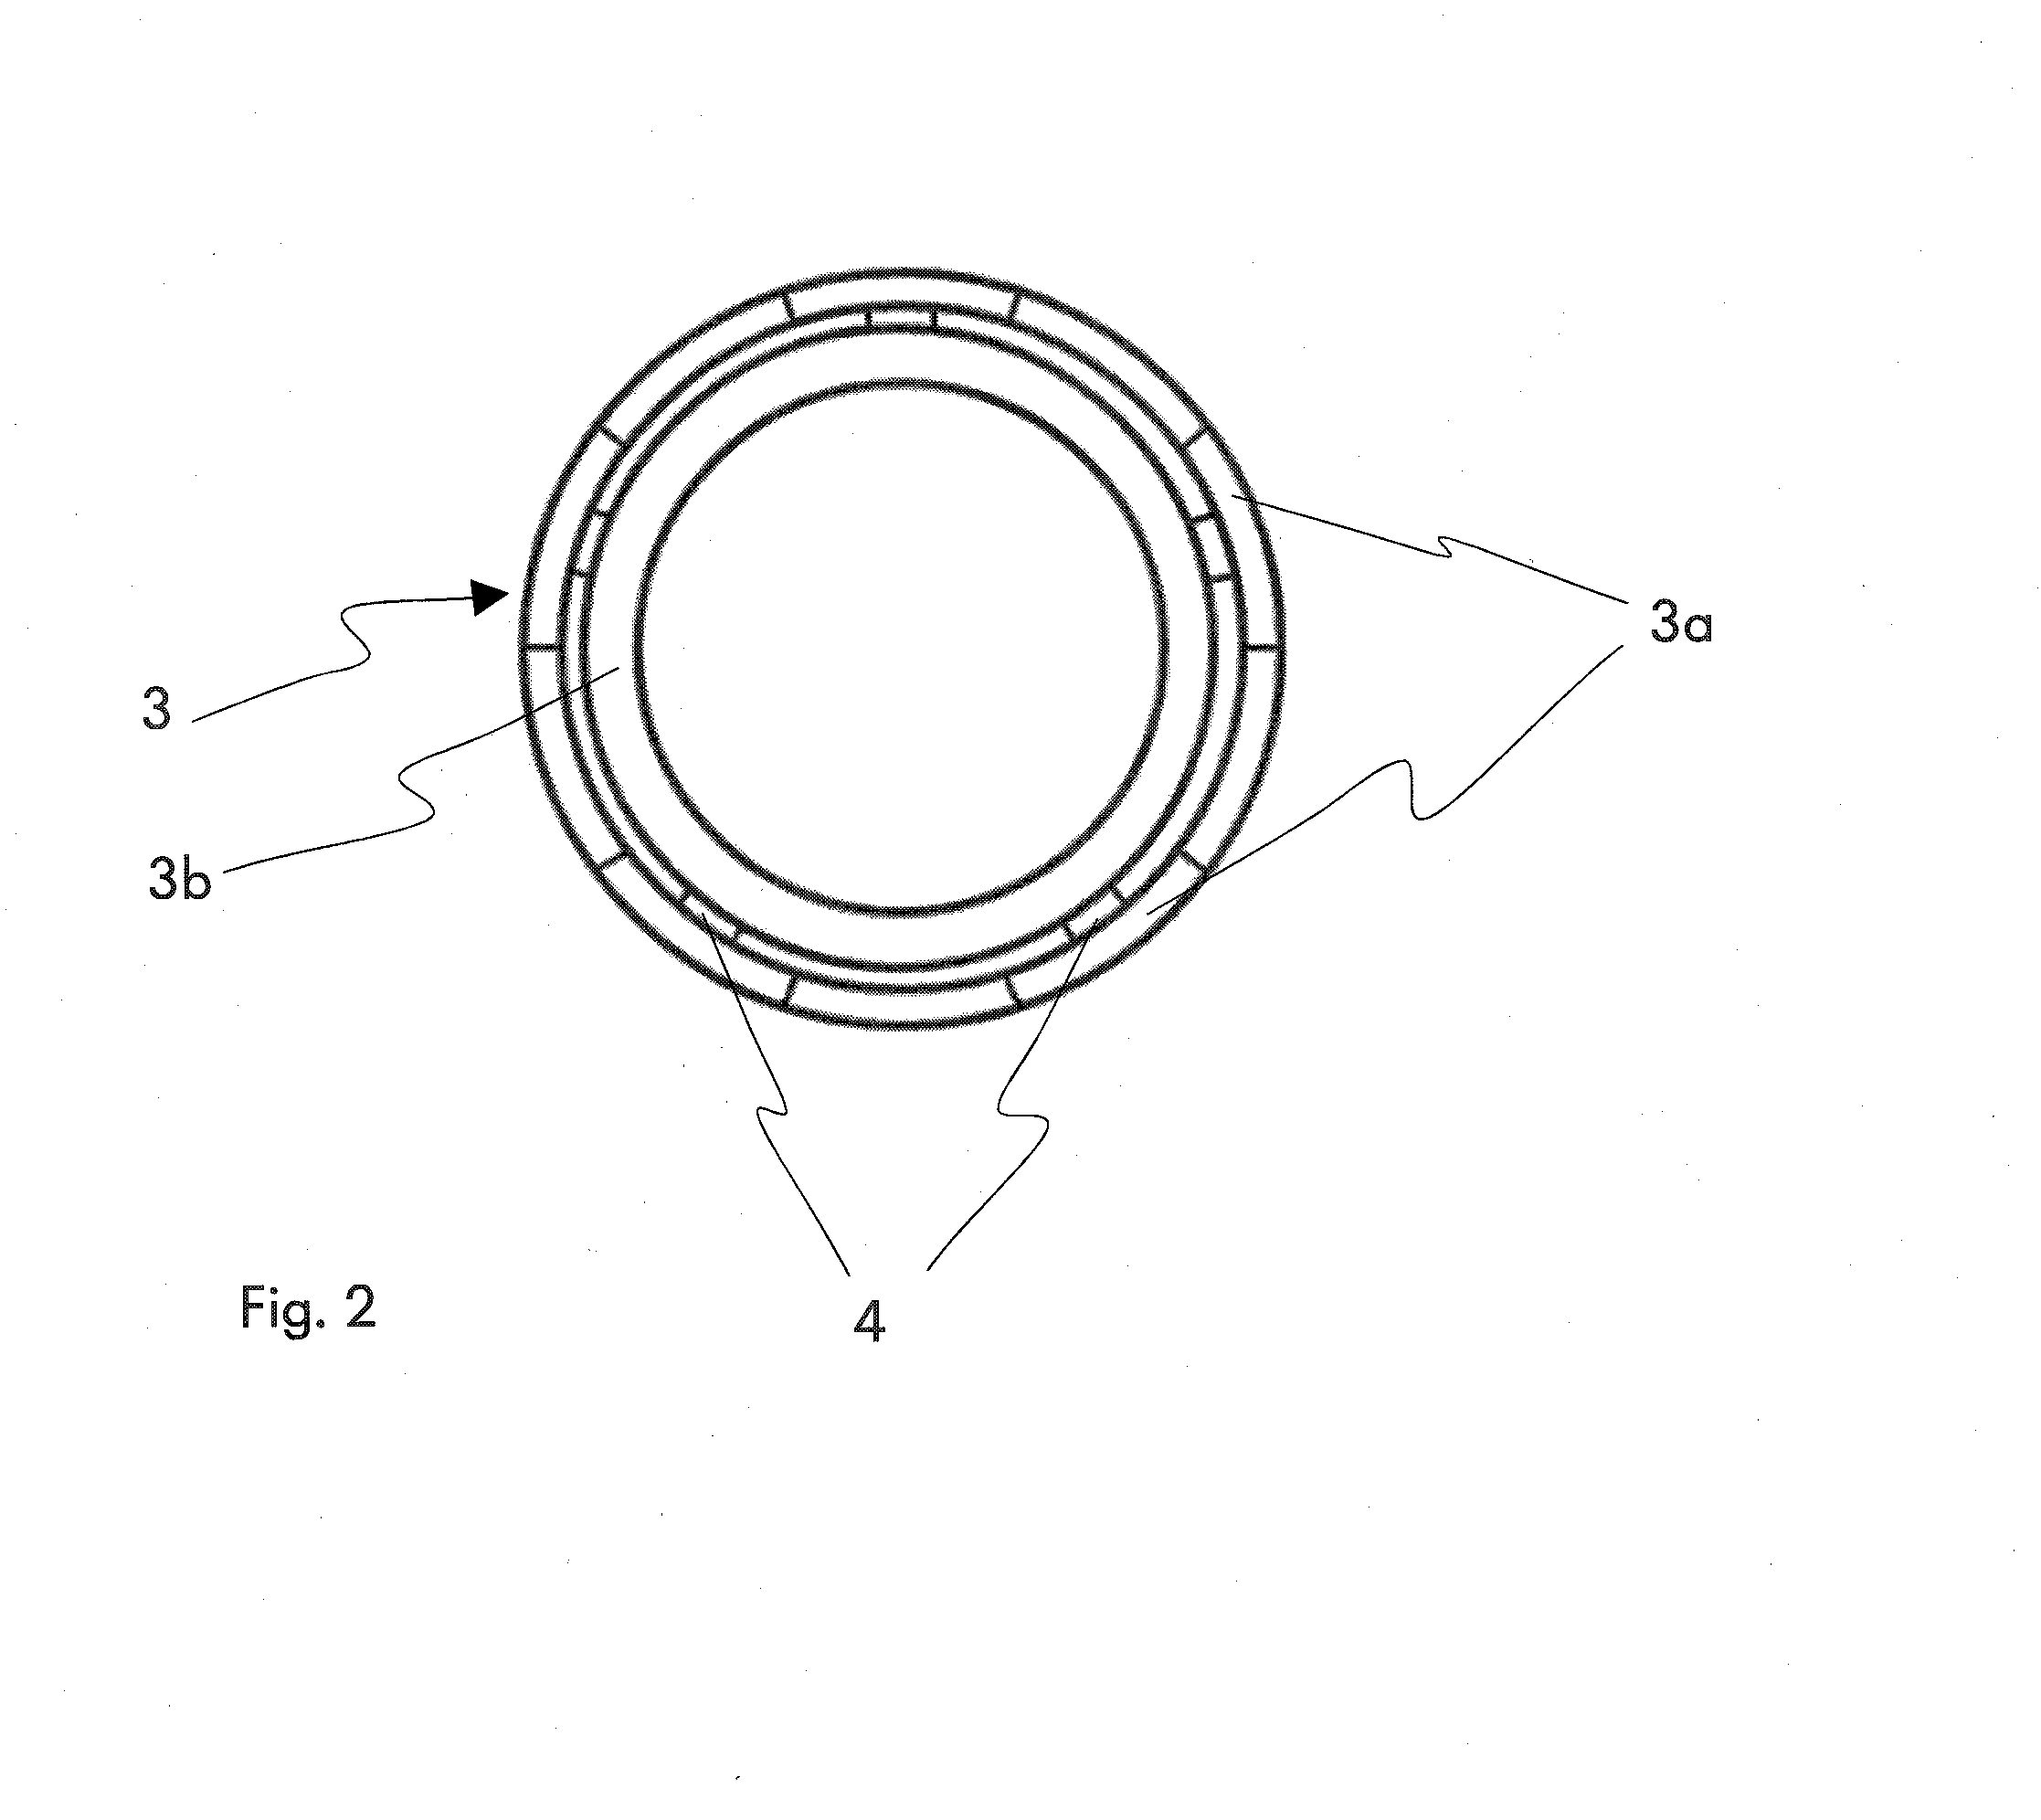 Arrangement on a component of a motor vehicle